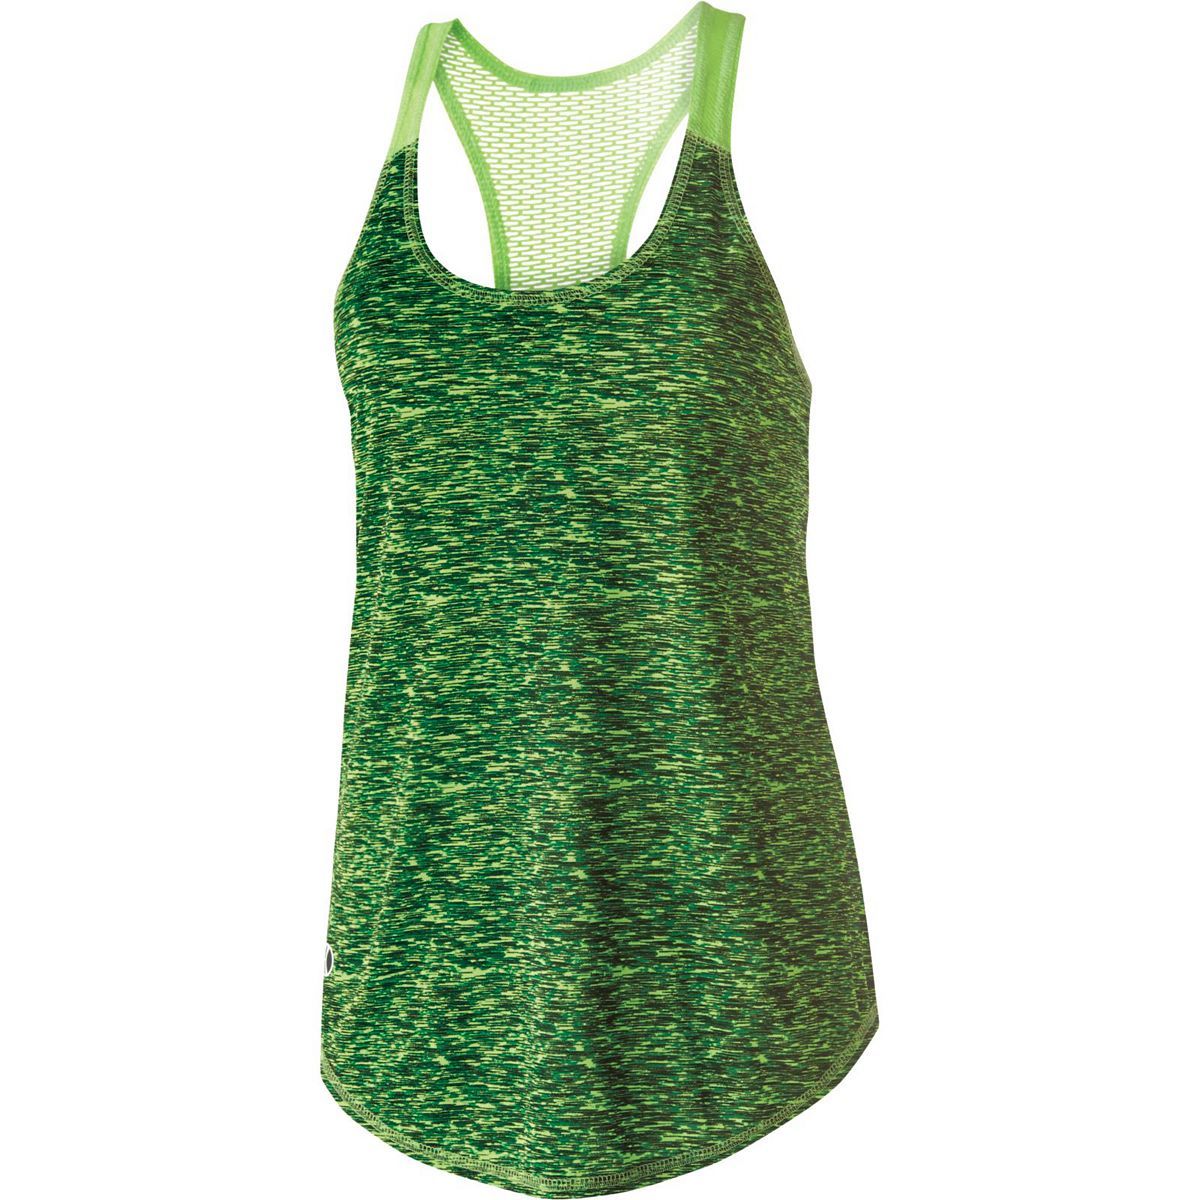 Holloway Girls Space Dye Tank in Green/Lime  -Part of the Girls, Holloway, Girls-Tank, Shirts product lines at KanaleyCreations.com